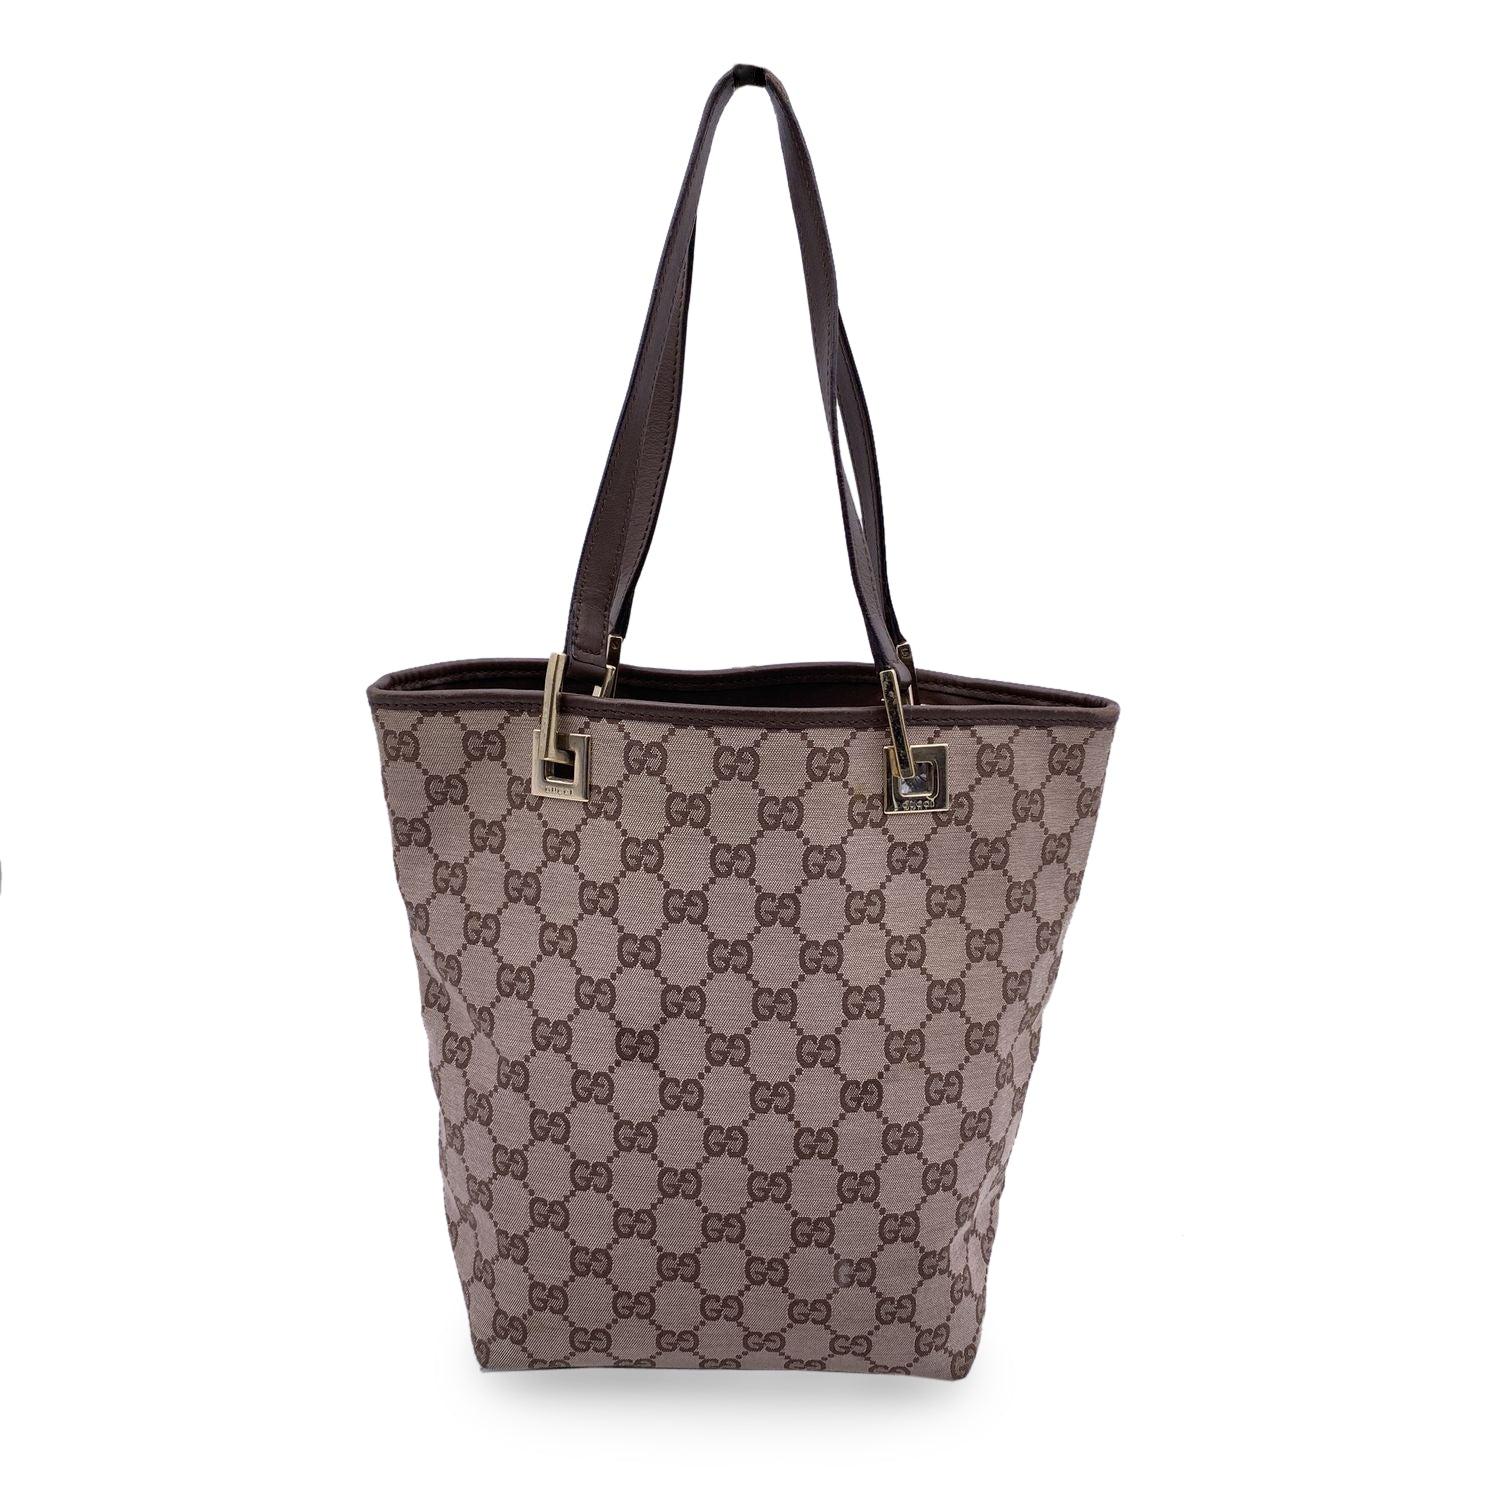 Beautiful Gucci small tote in beige monogram canvas with brown leather trim and handles. Light gold metal hardware. Open top. Brown fabric lining, 1 side zip pocket inside. 'GUCCI - Made in Italy' tag inside (with serial number on its reverse)